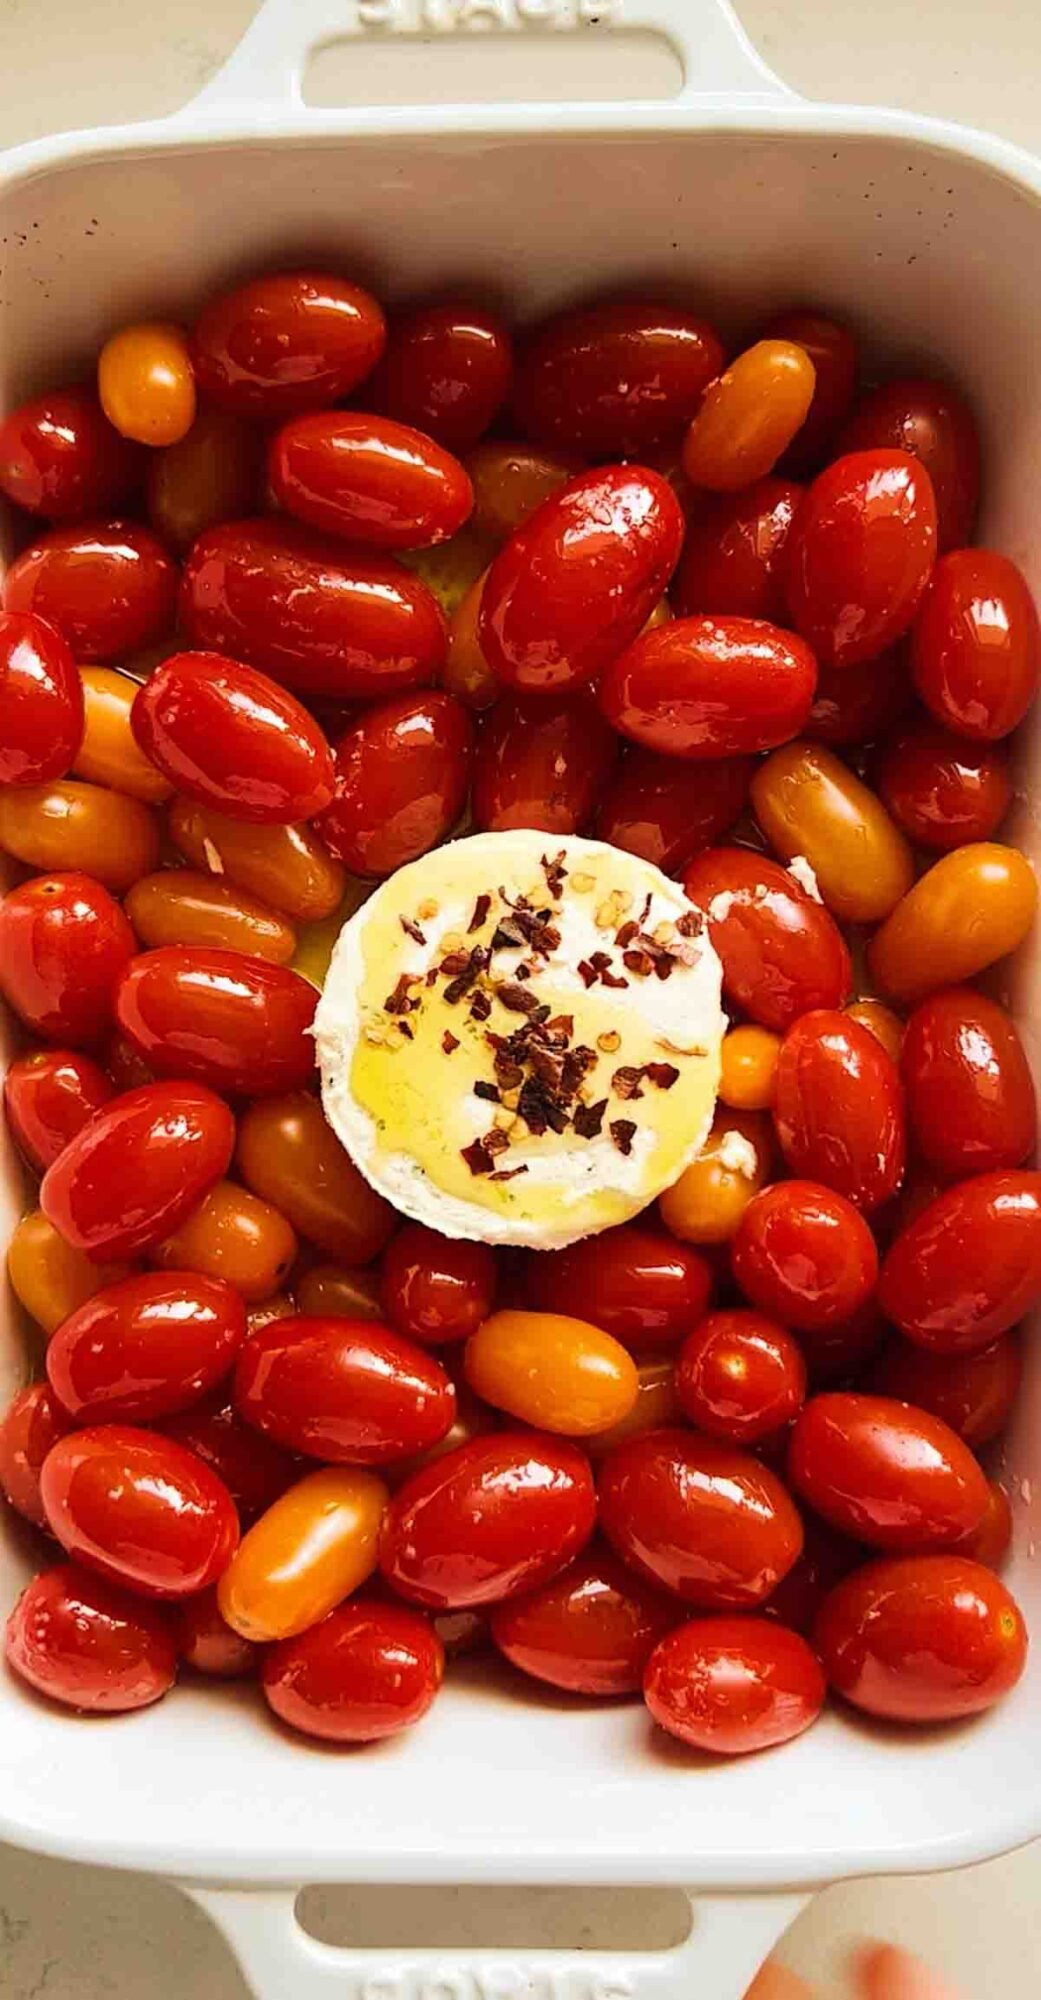 boursin cheese in the middle of cherry tomatoes with olive oil, salt and red pepper flakes.